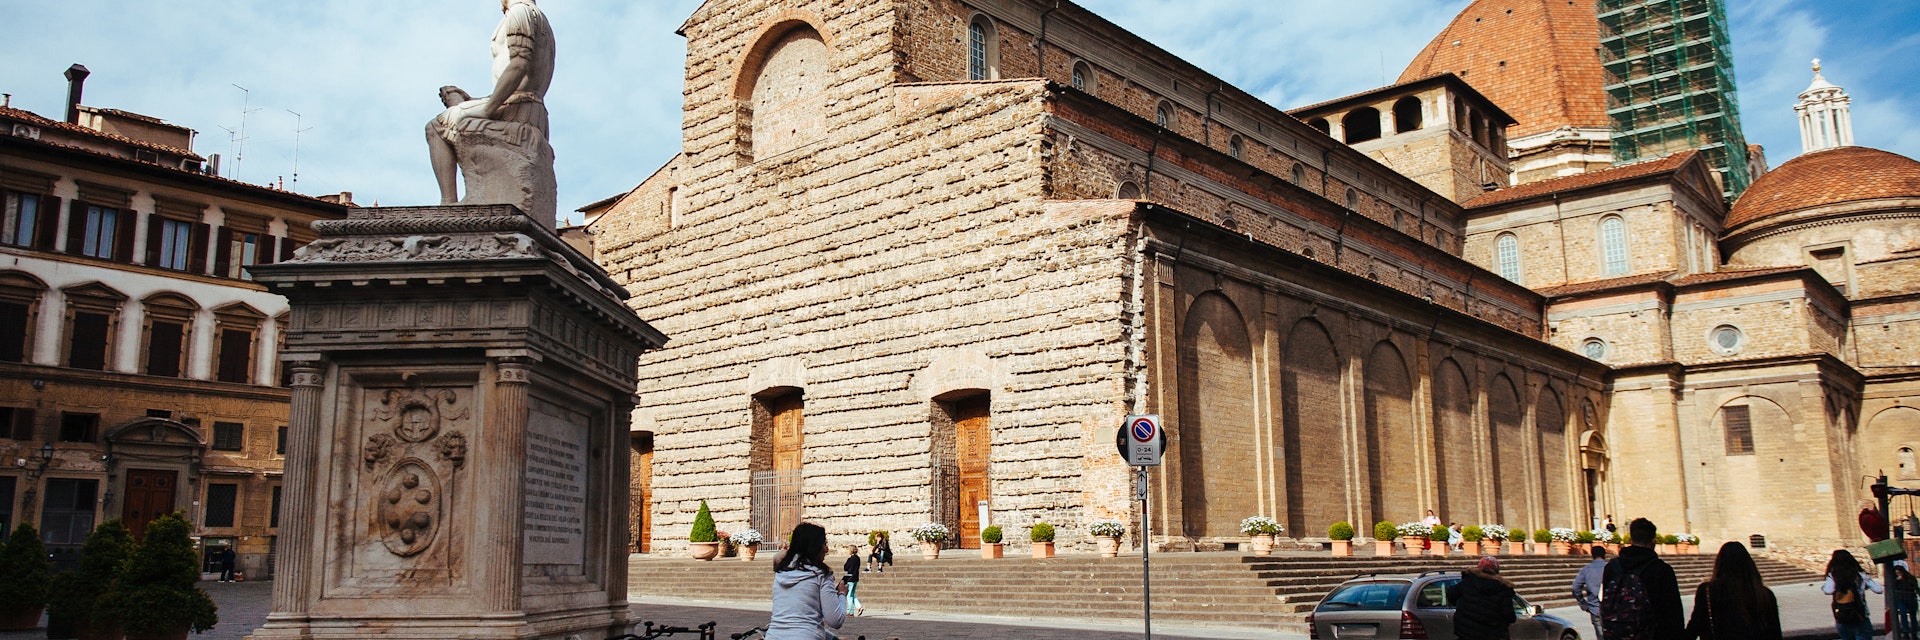 Basilica of Saint Lawrence in Florence